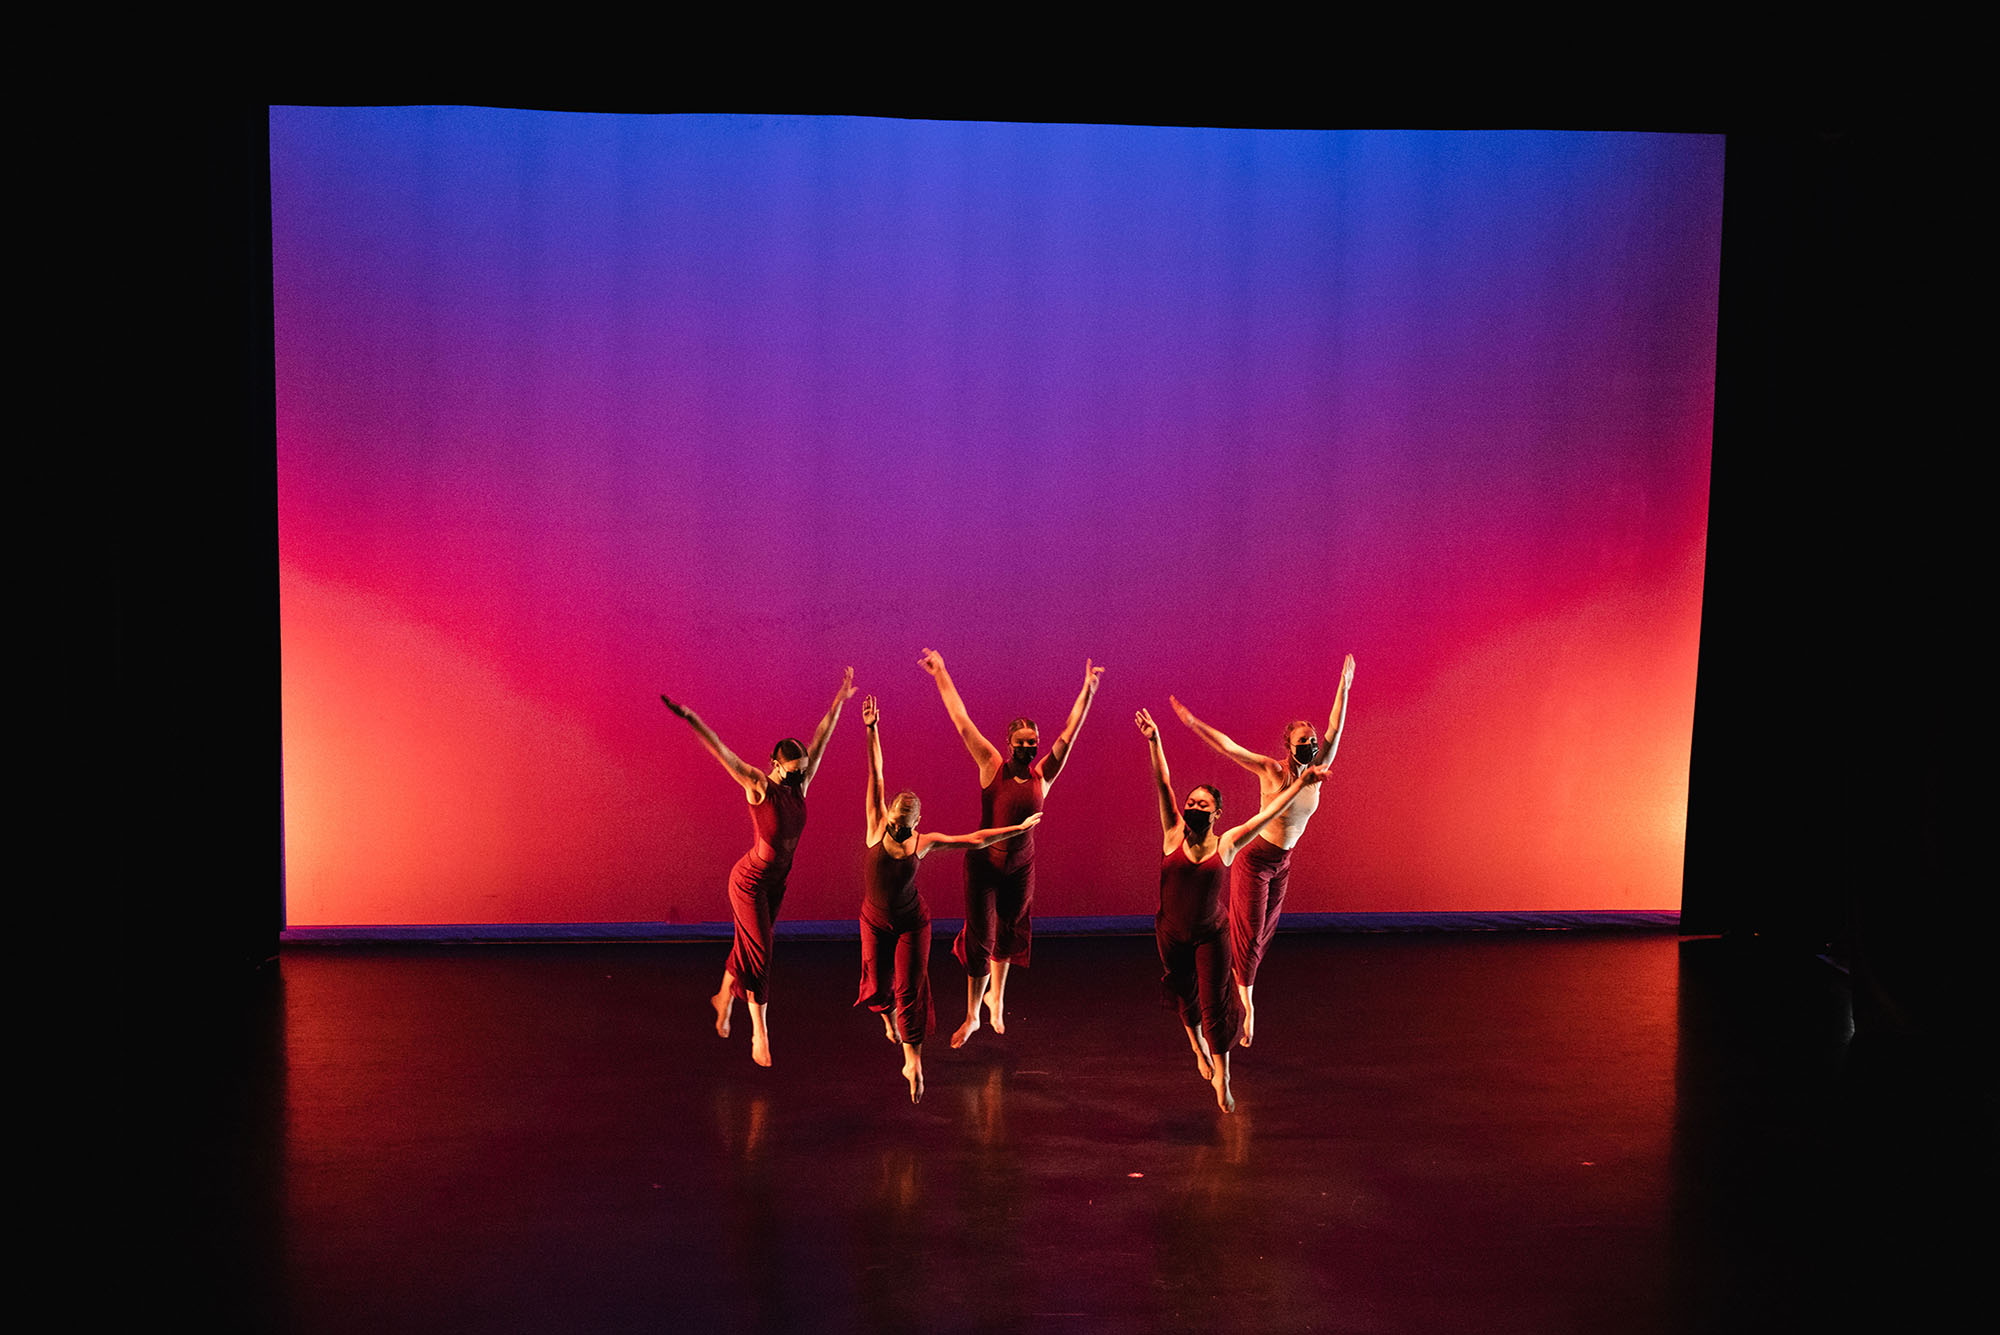 photo of 5 dancers on stage int he Fall 2021 Origins performance. They dance with toes pointed and arms in air, as they all wear black leotards and hair styled in sleek buns. They are illuminated by a red, purple, orange, and blue light that mimics the look of a sunrise on the backdrop.